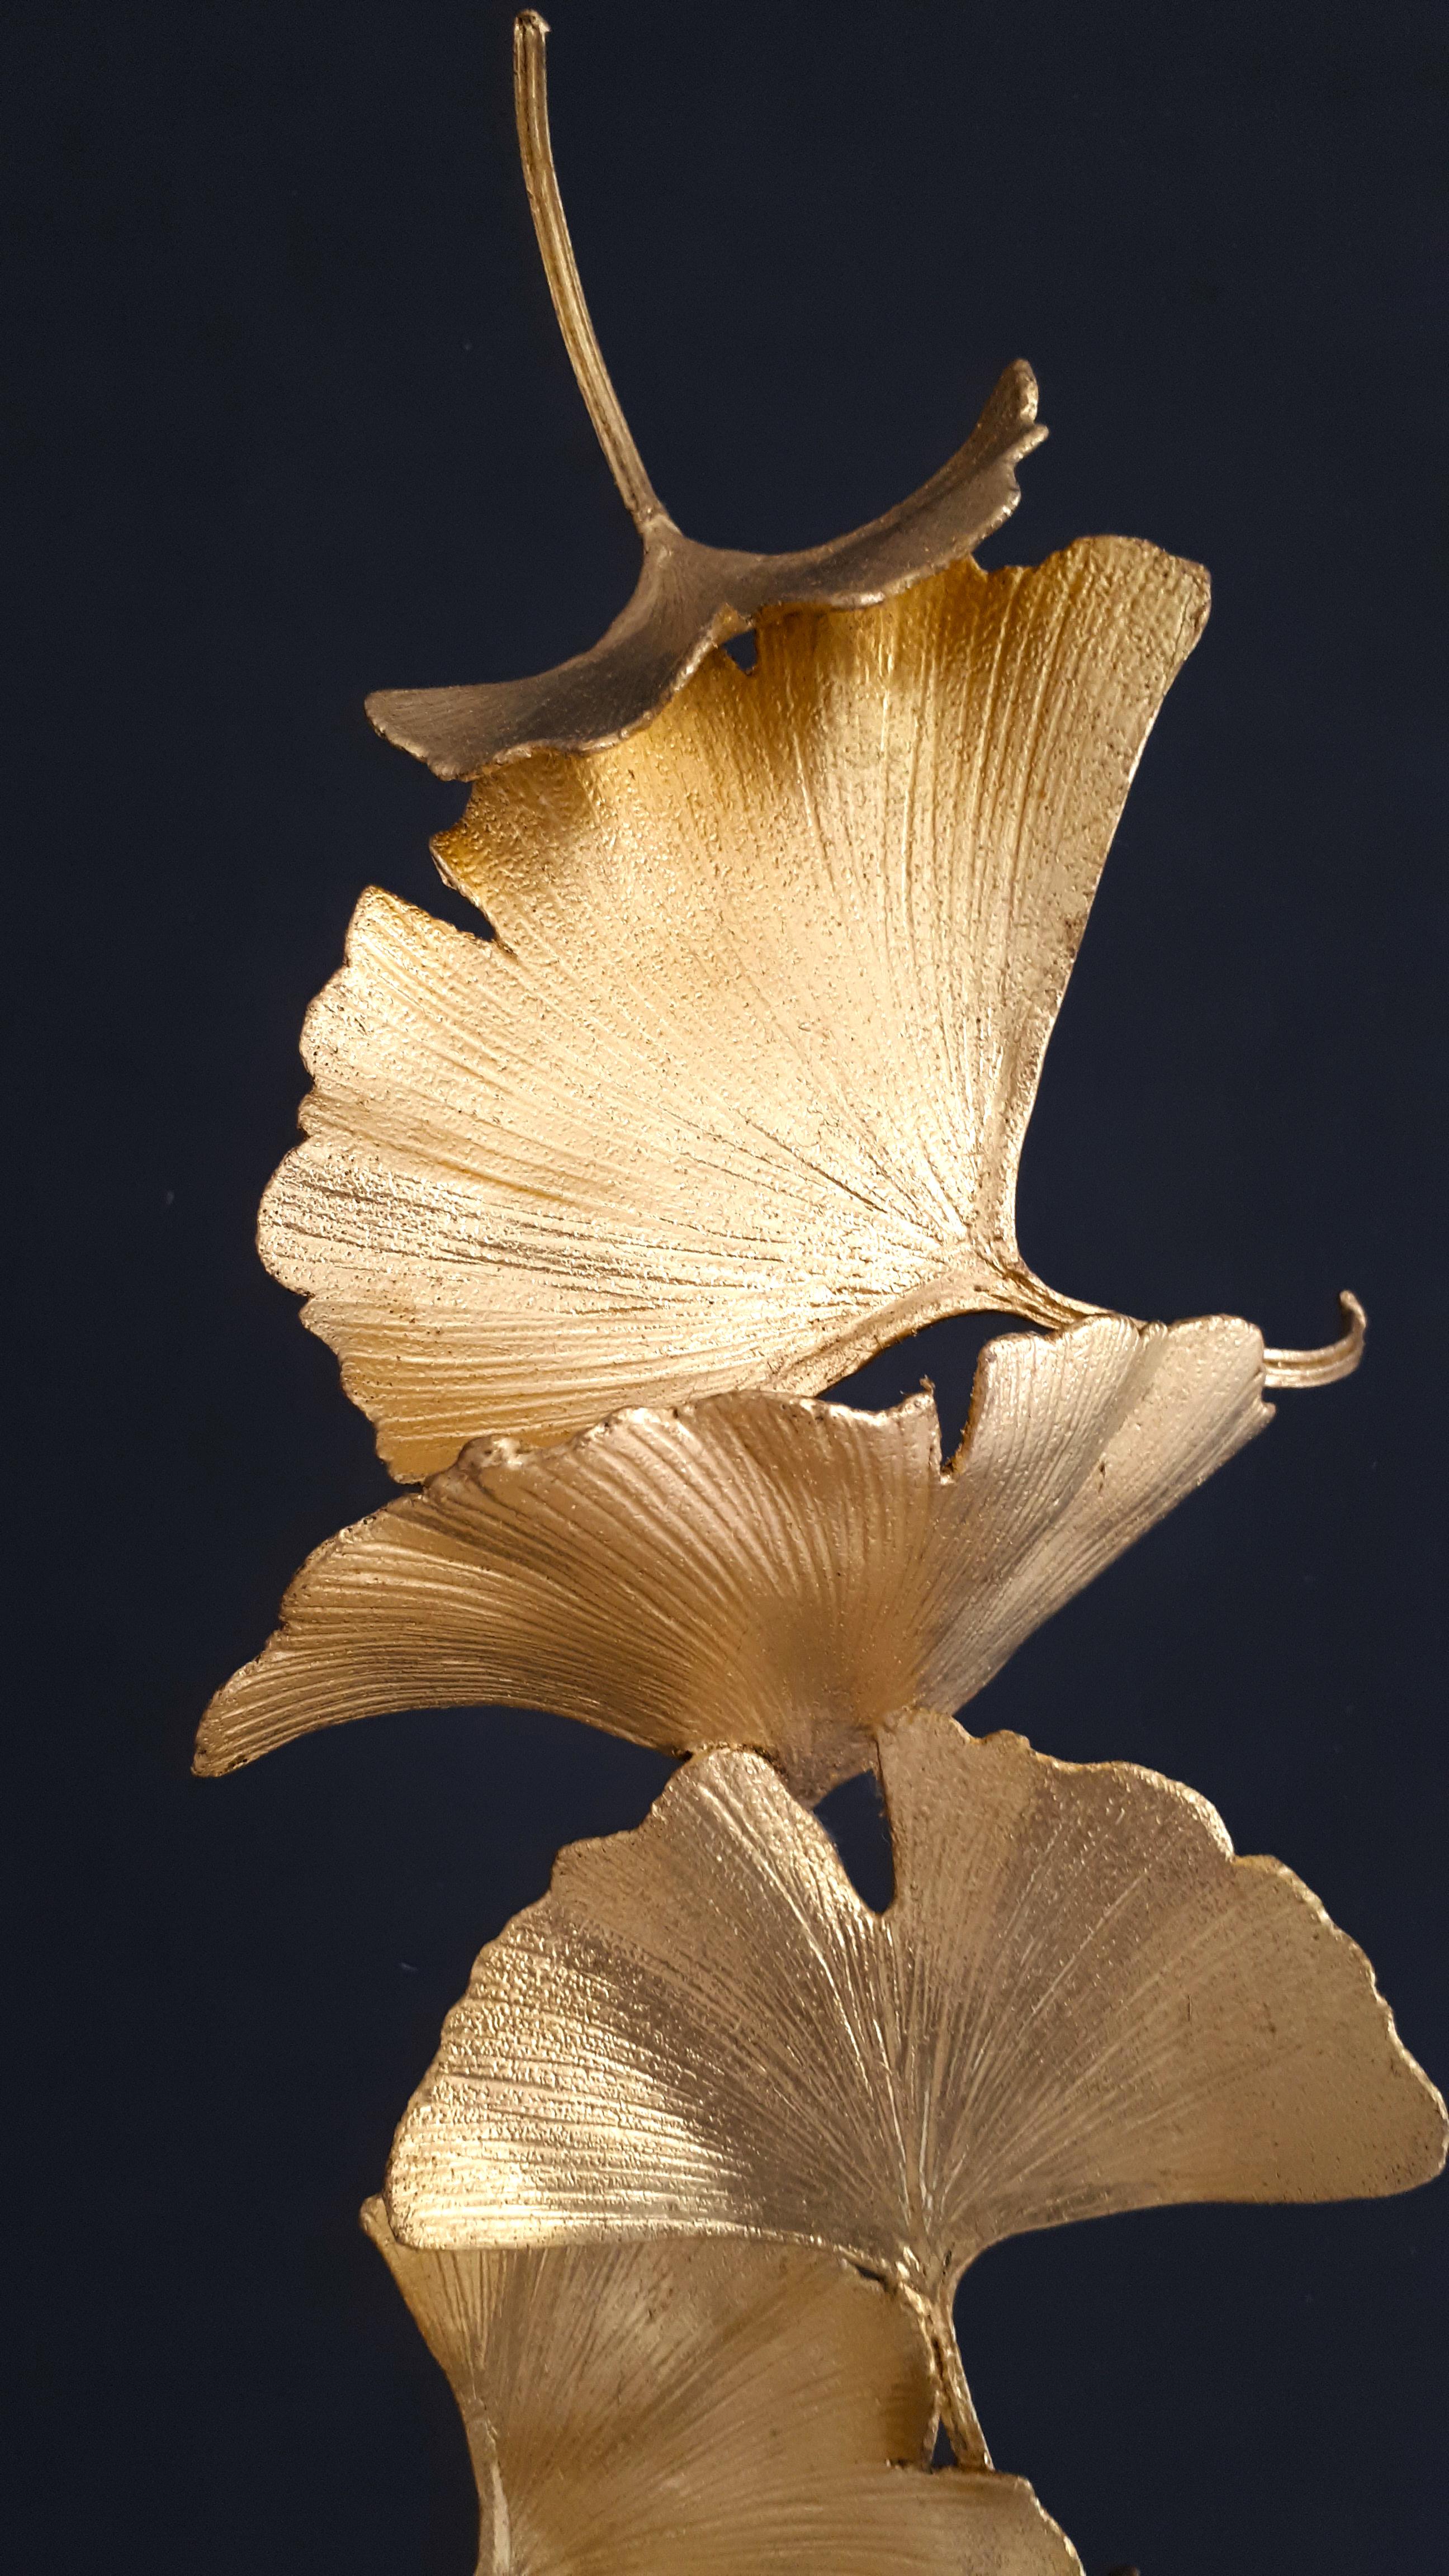 Artist: Kuno Vollet

Title: Golden Gingko with 6 leaves art sculpture

Materials: Cast brass, gold leaf, black granite base (rough or smooth finish available)

Size: 60 x 9 x 9 cm

24k gilded leaves - cast